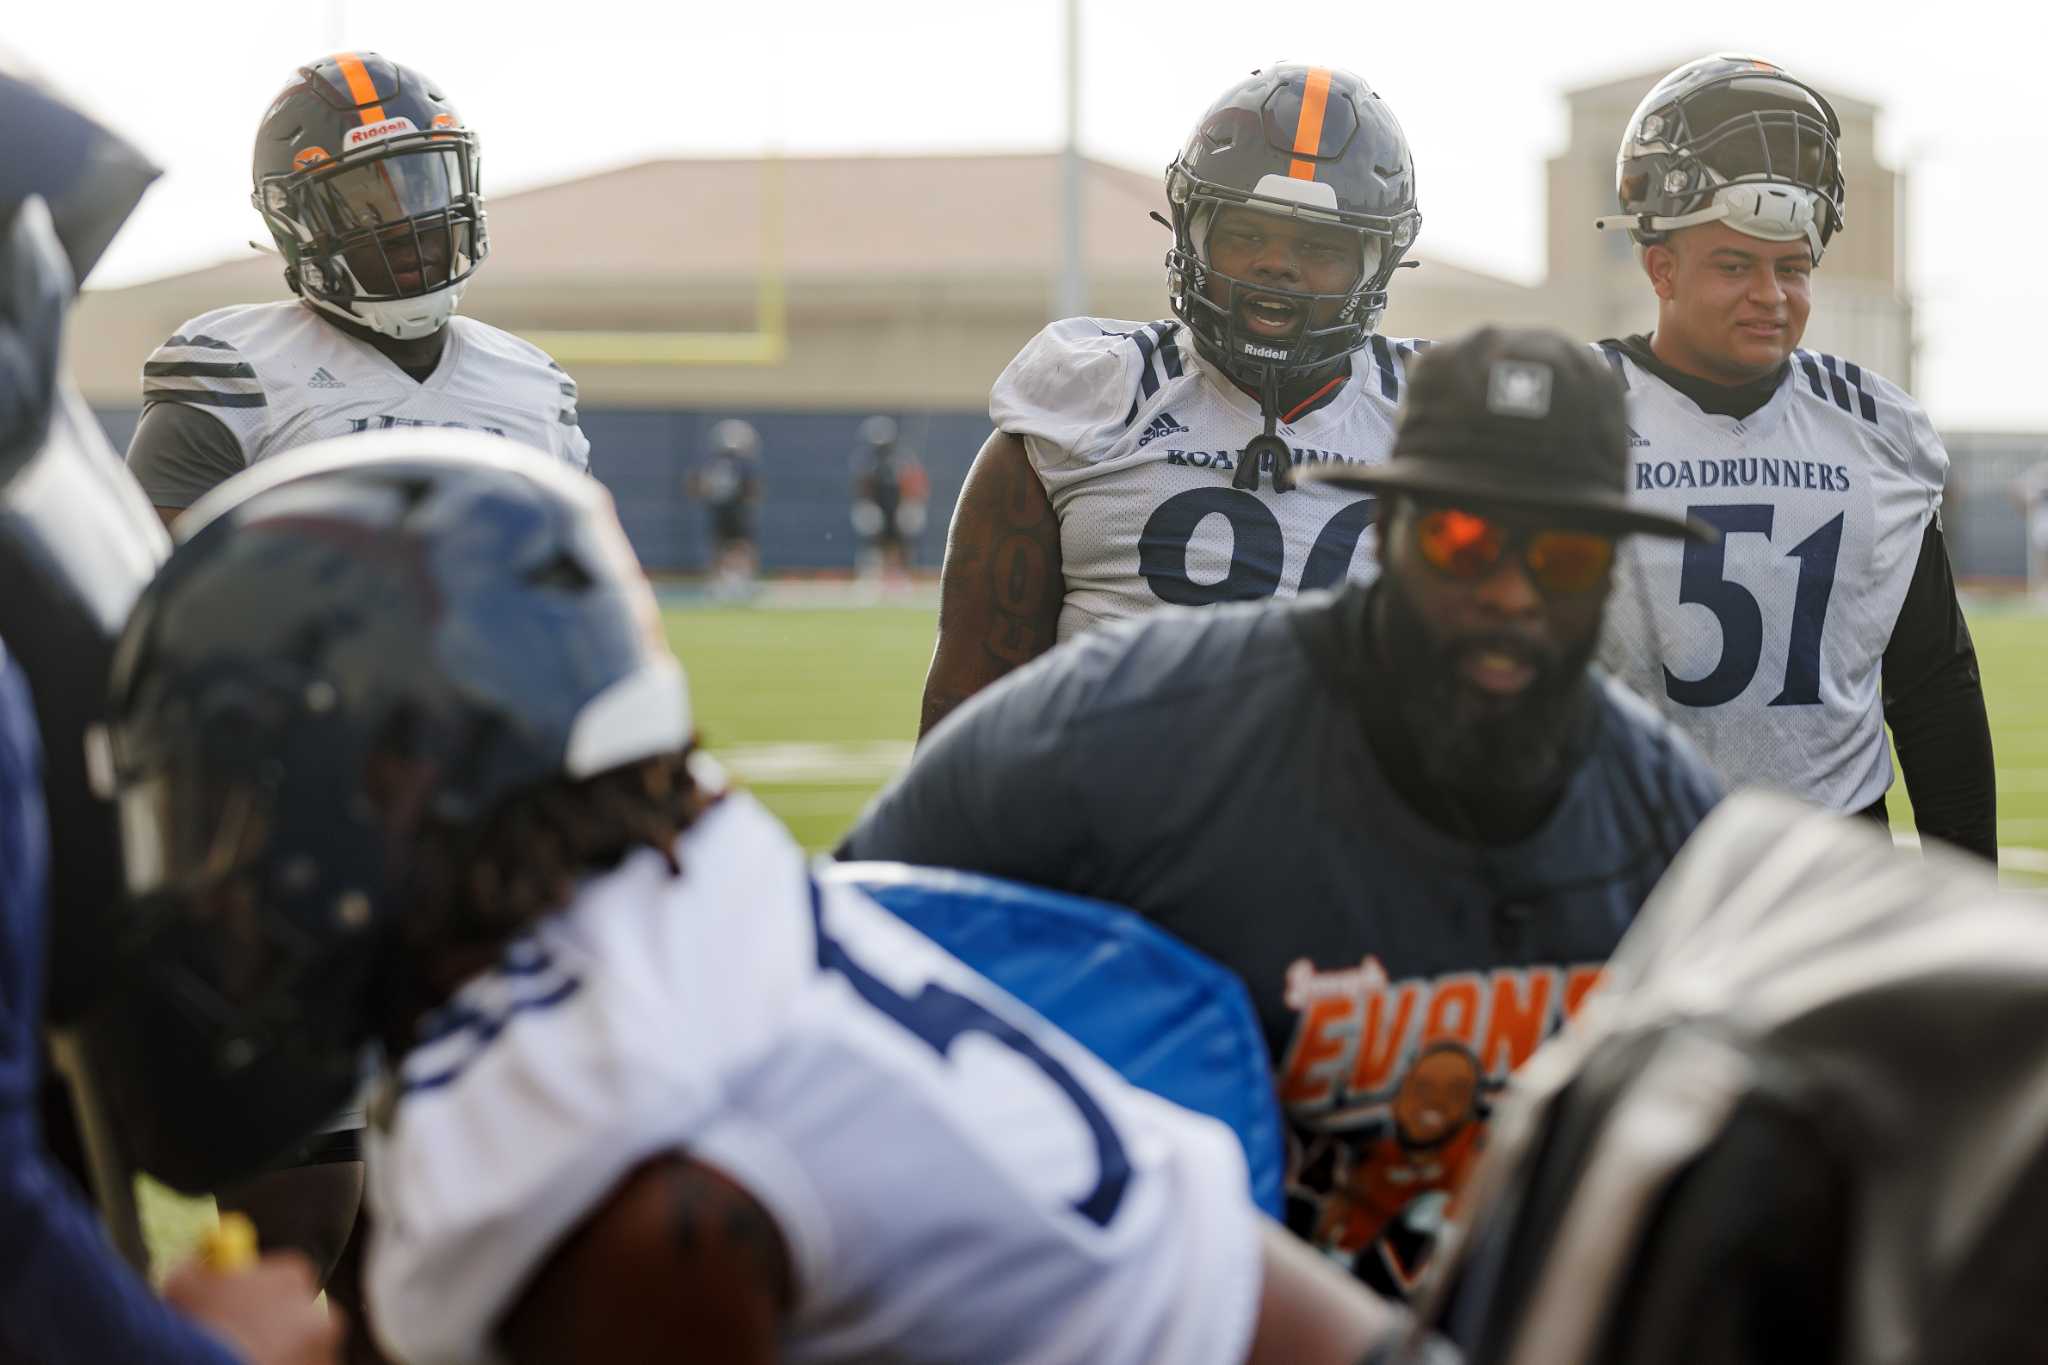 With workmanlike approach, UTSA holds steady on first day of preseason practice